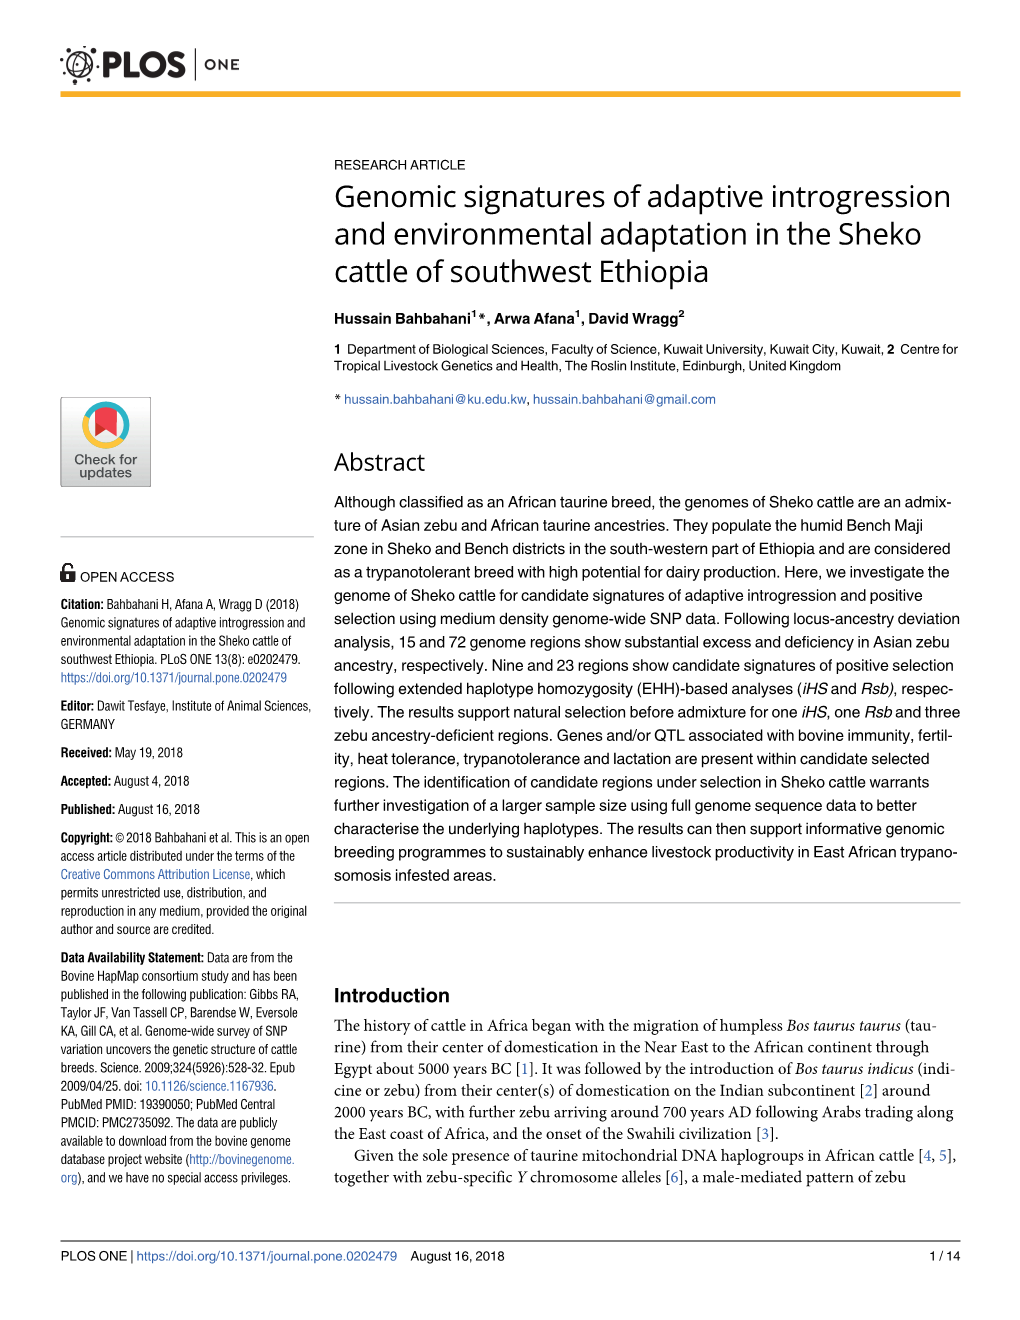 Genomic Signatures of Adaptive Introgression and Environmental Adaptation in the Sheko Cattle of Southwest Ethiopia